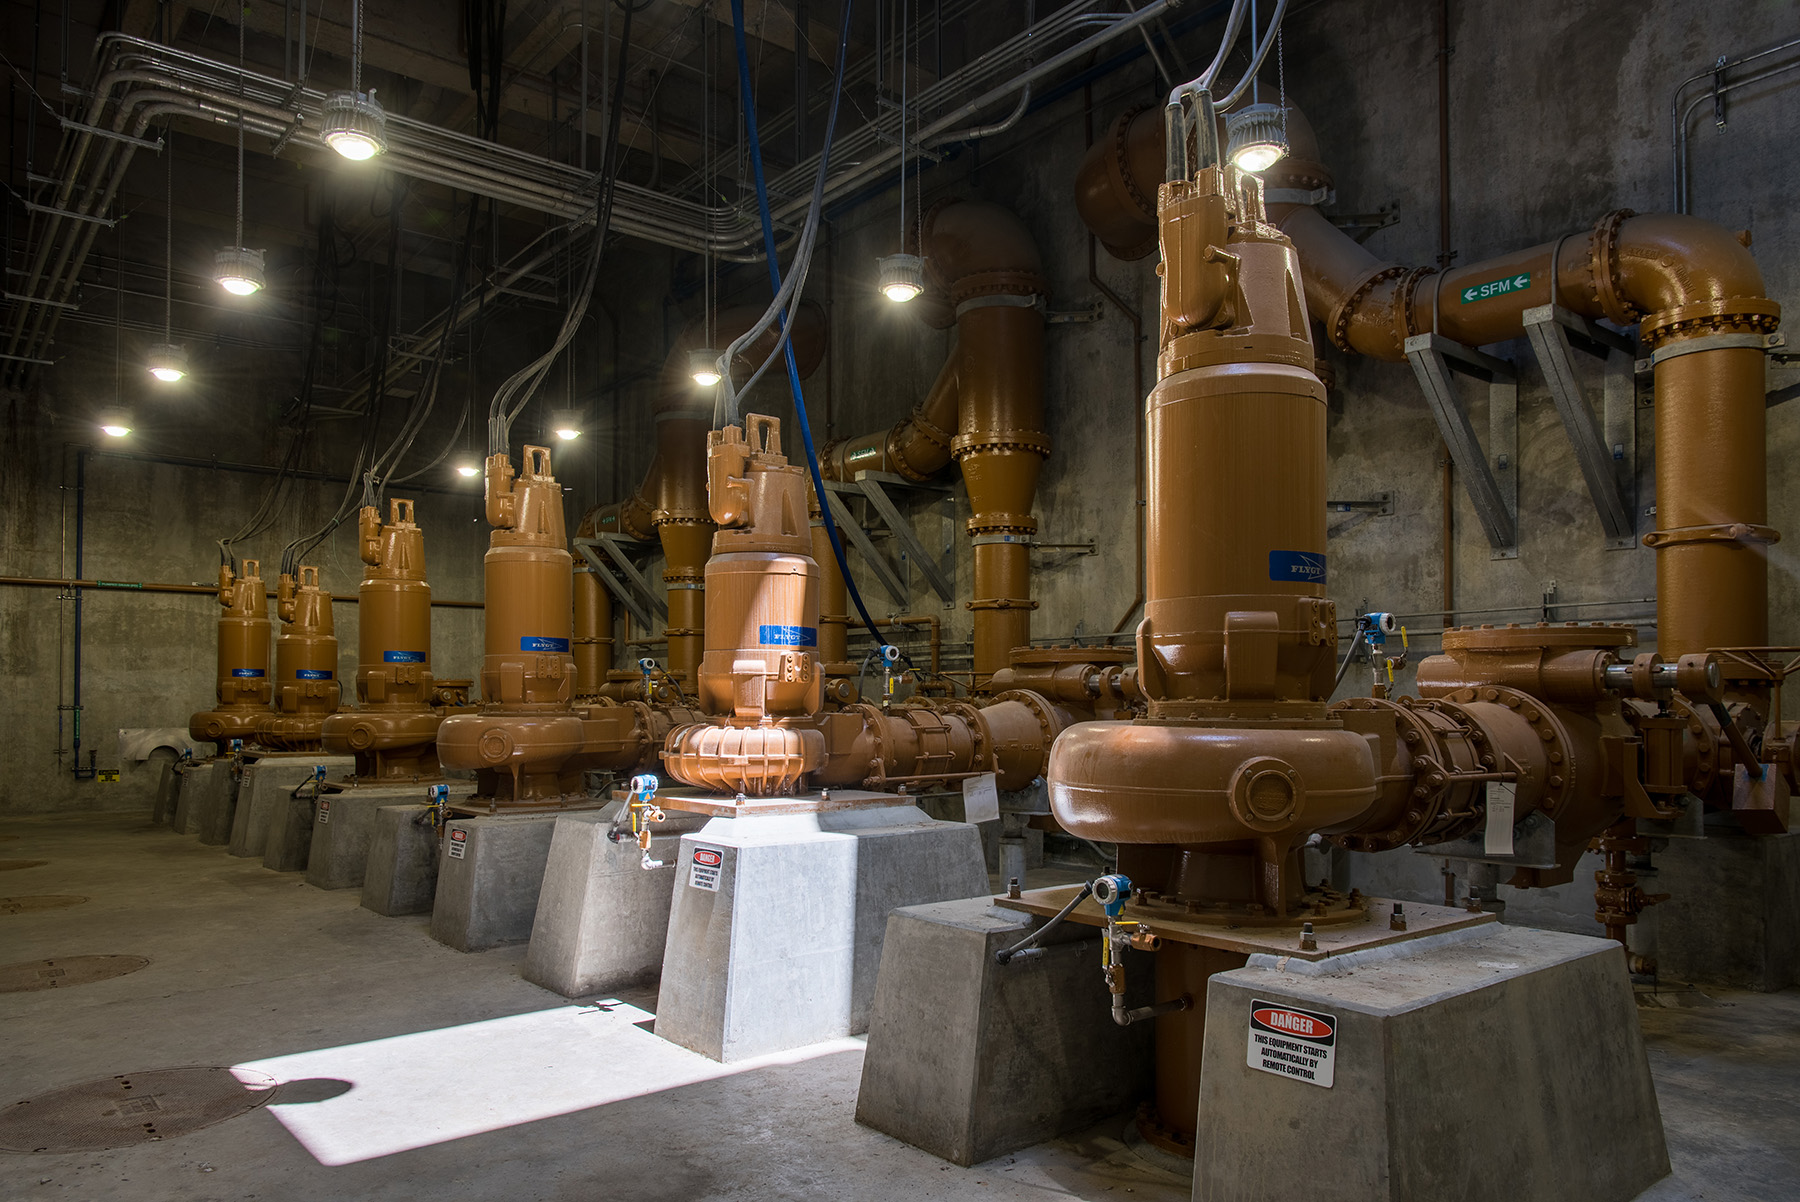 Large, oblong orange tanks are attached to concrete platforms. The tanks have arrays of pipes connected to the ceiling.